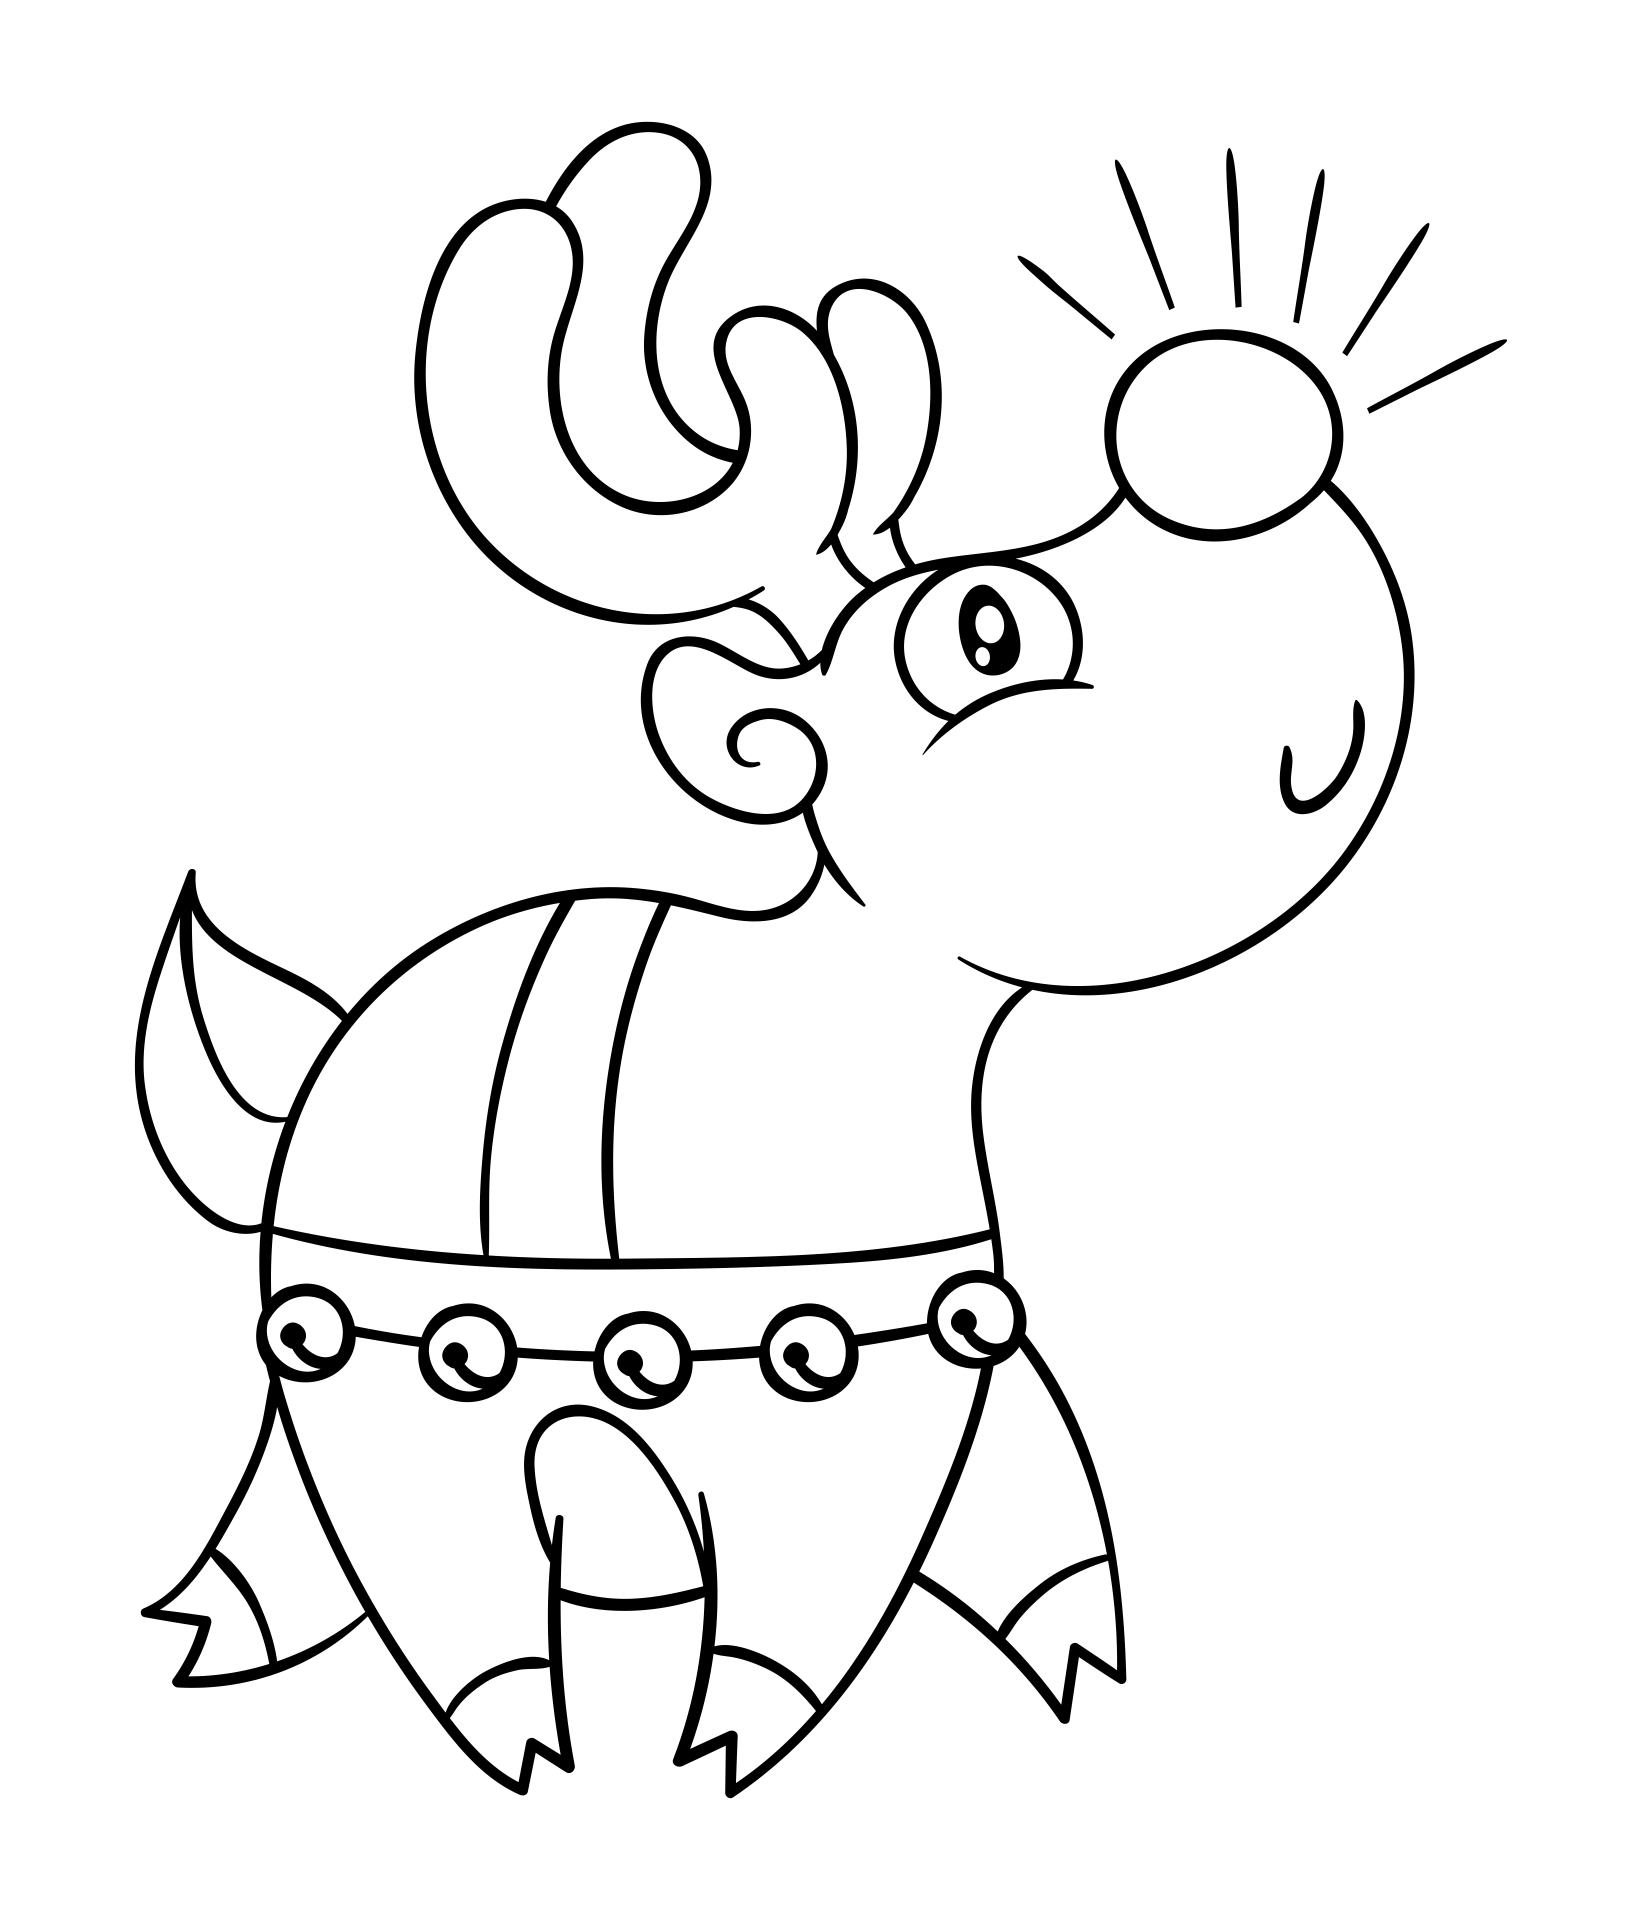 Rudolph the Red Nosed Reindeer Coloring Pages Printable